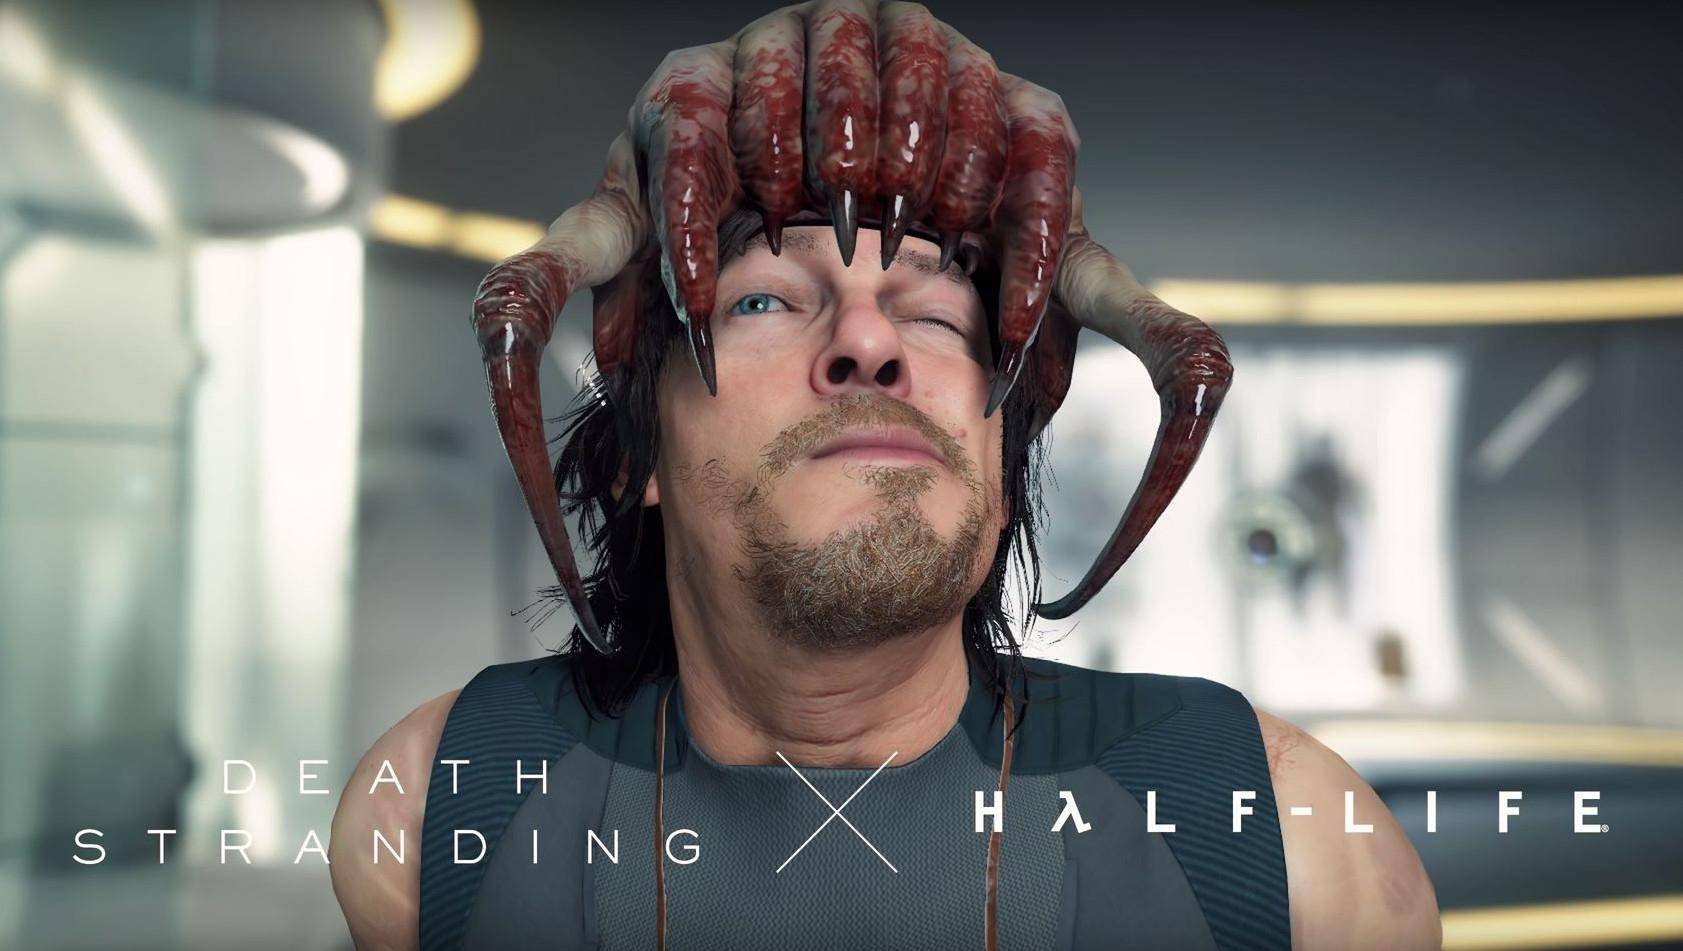 Death Stranding is coming to PC